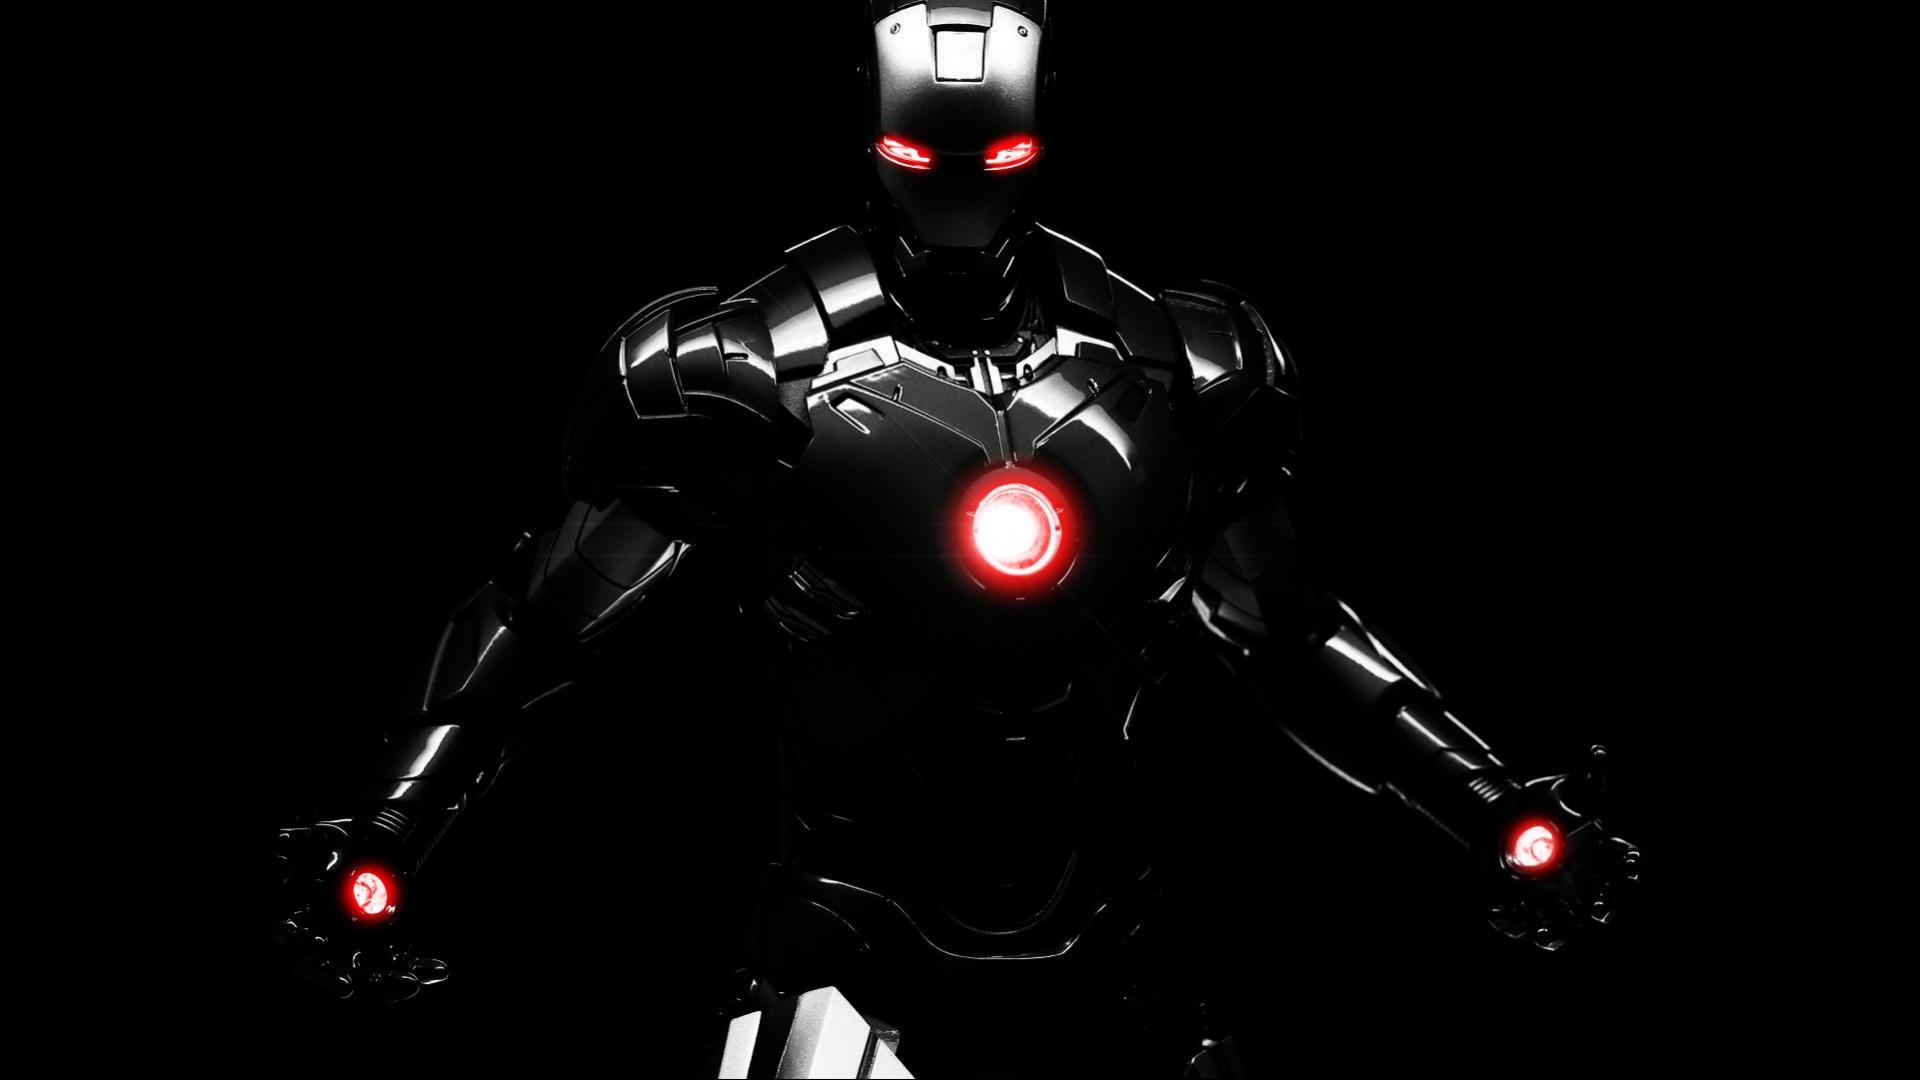 Desktop Wallpaper High Definition In 1080p With Iron Man